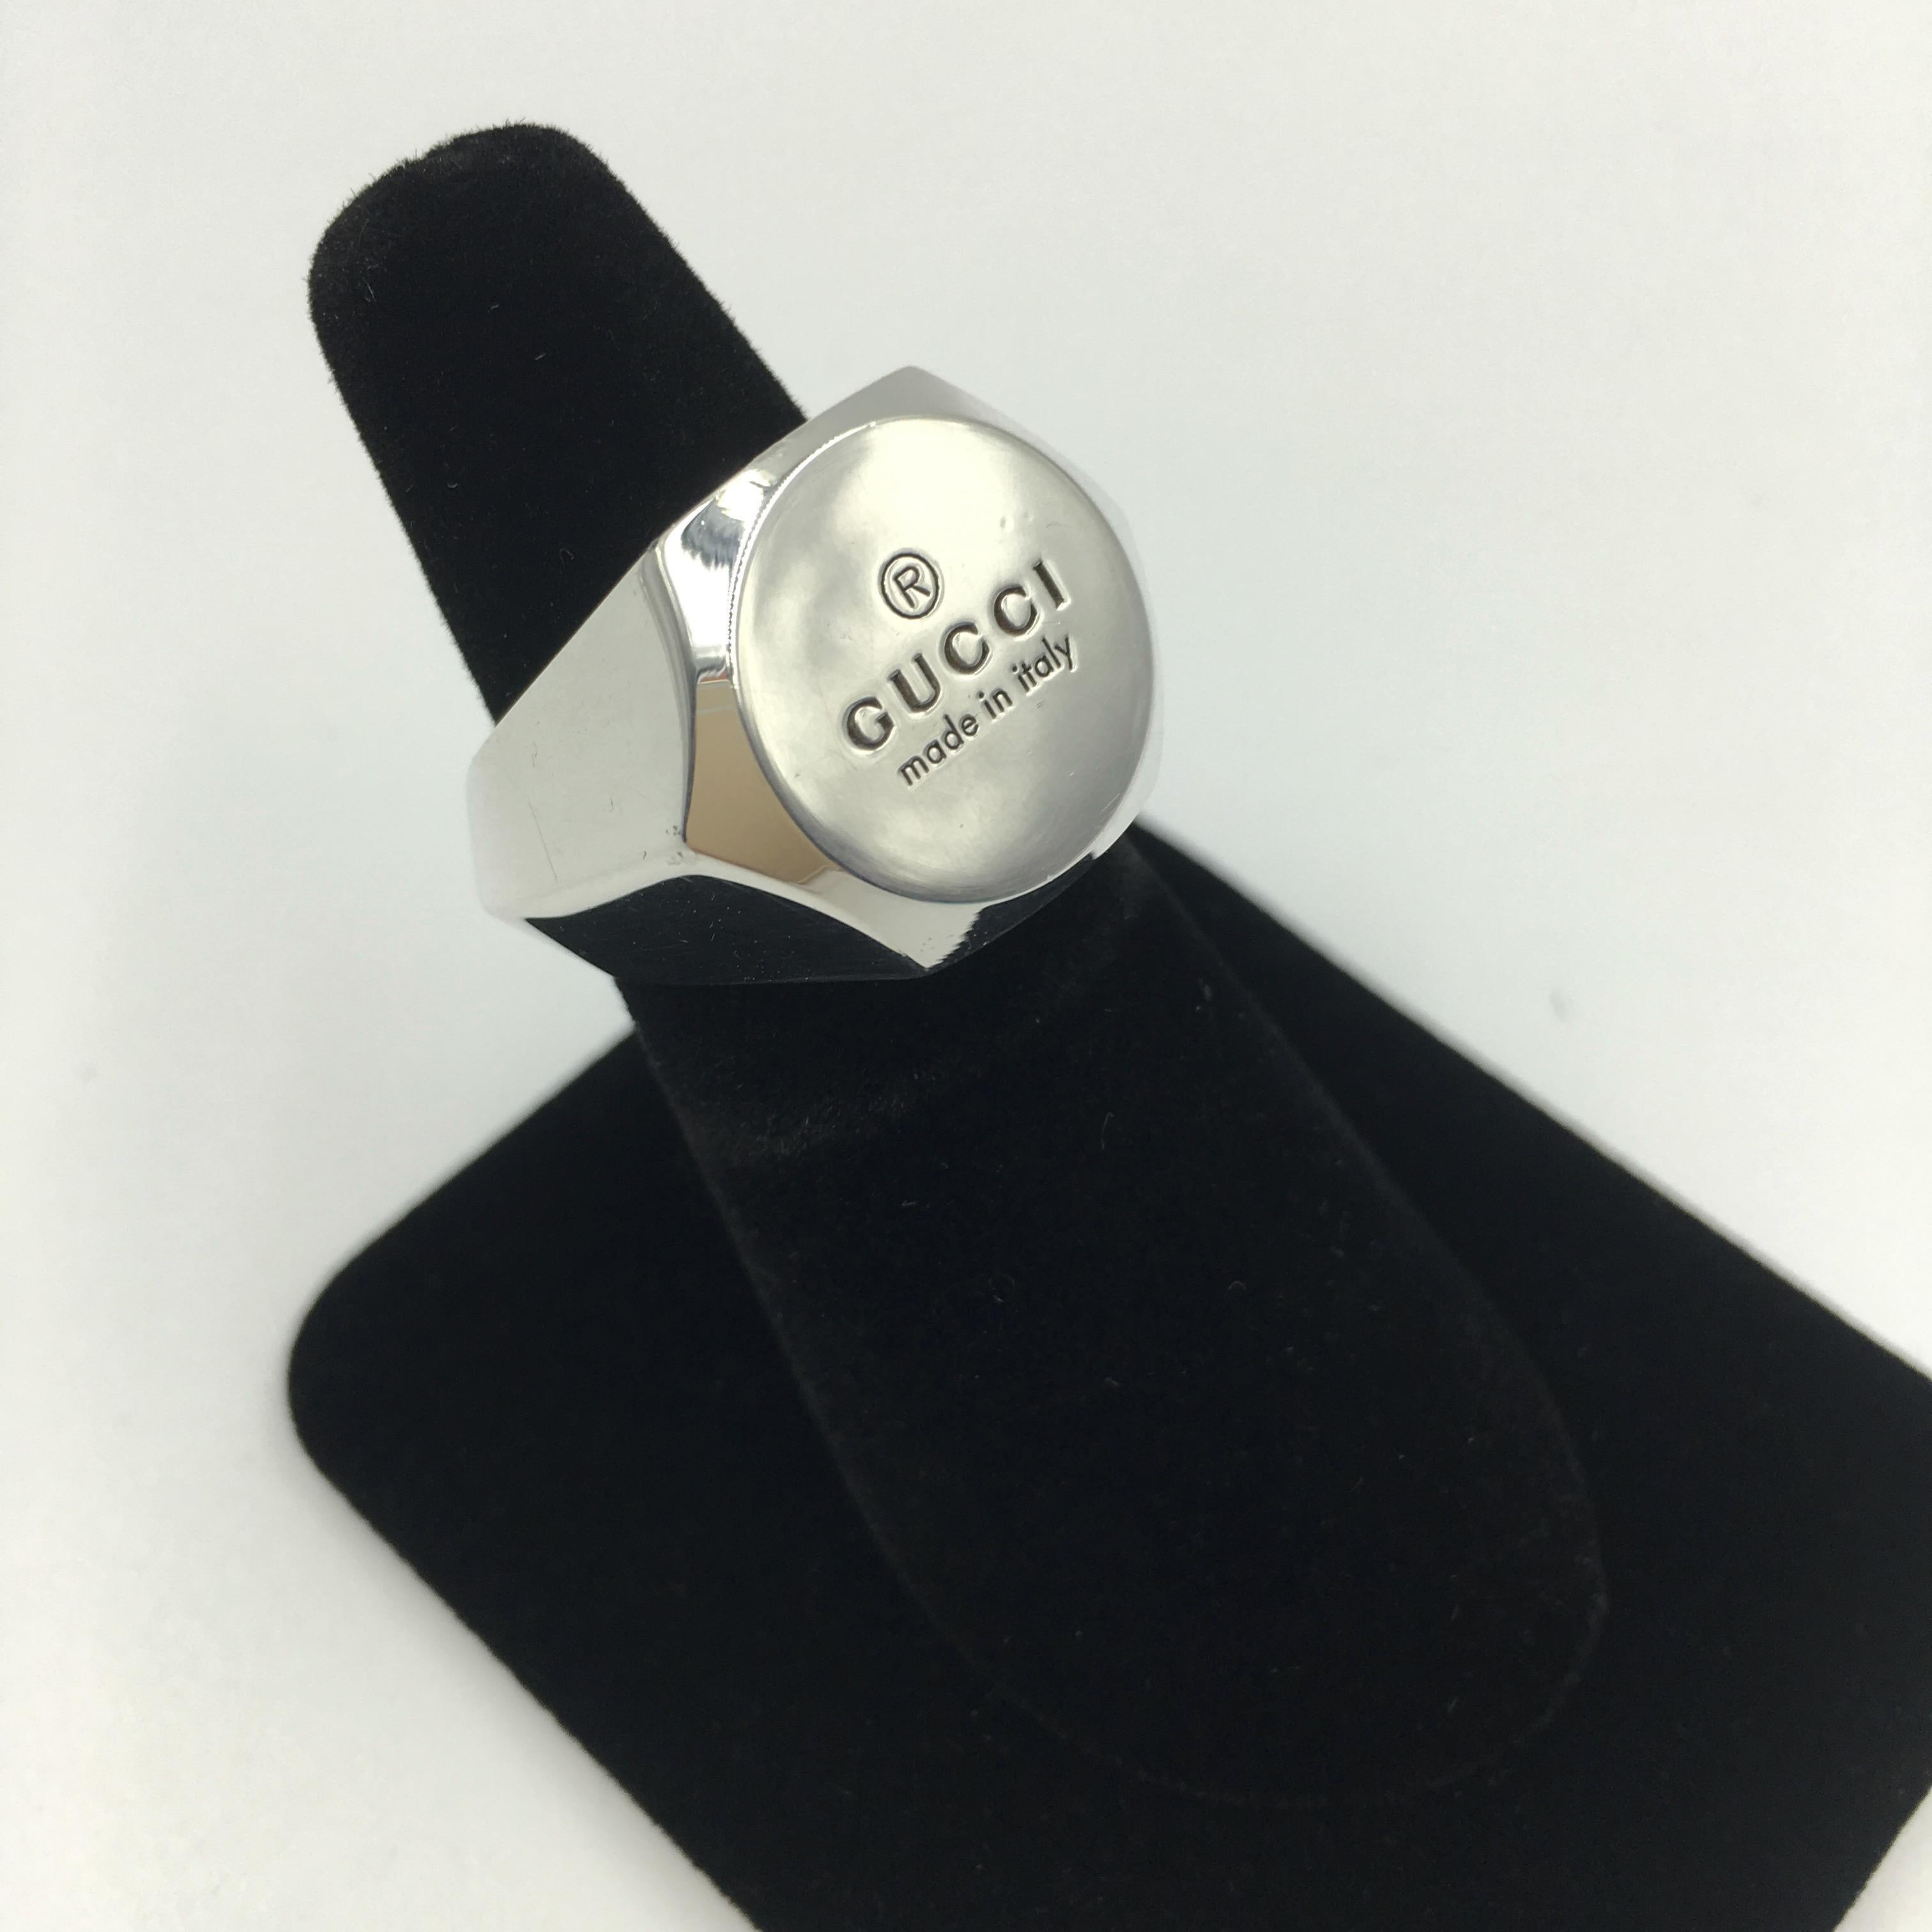 Tom Ford for Gucci Engraved Logo Sterling Silver Signet Ring. Stamped Gucci and 925 inside. 
Ring size US 7 1/2. See measurements to compare to a ring you already own.
Good vintage condition.

Outer measurements are as follows:
Width-